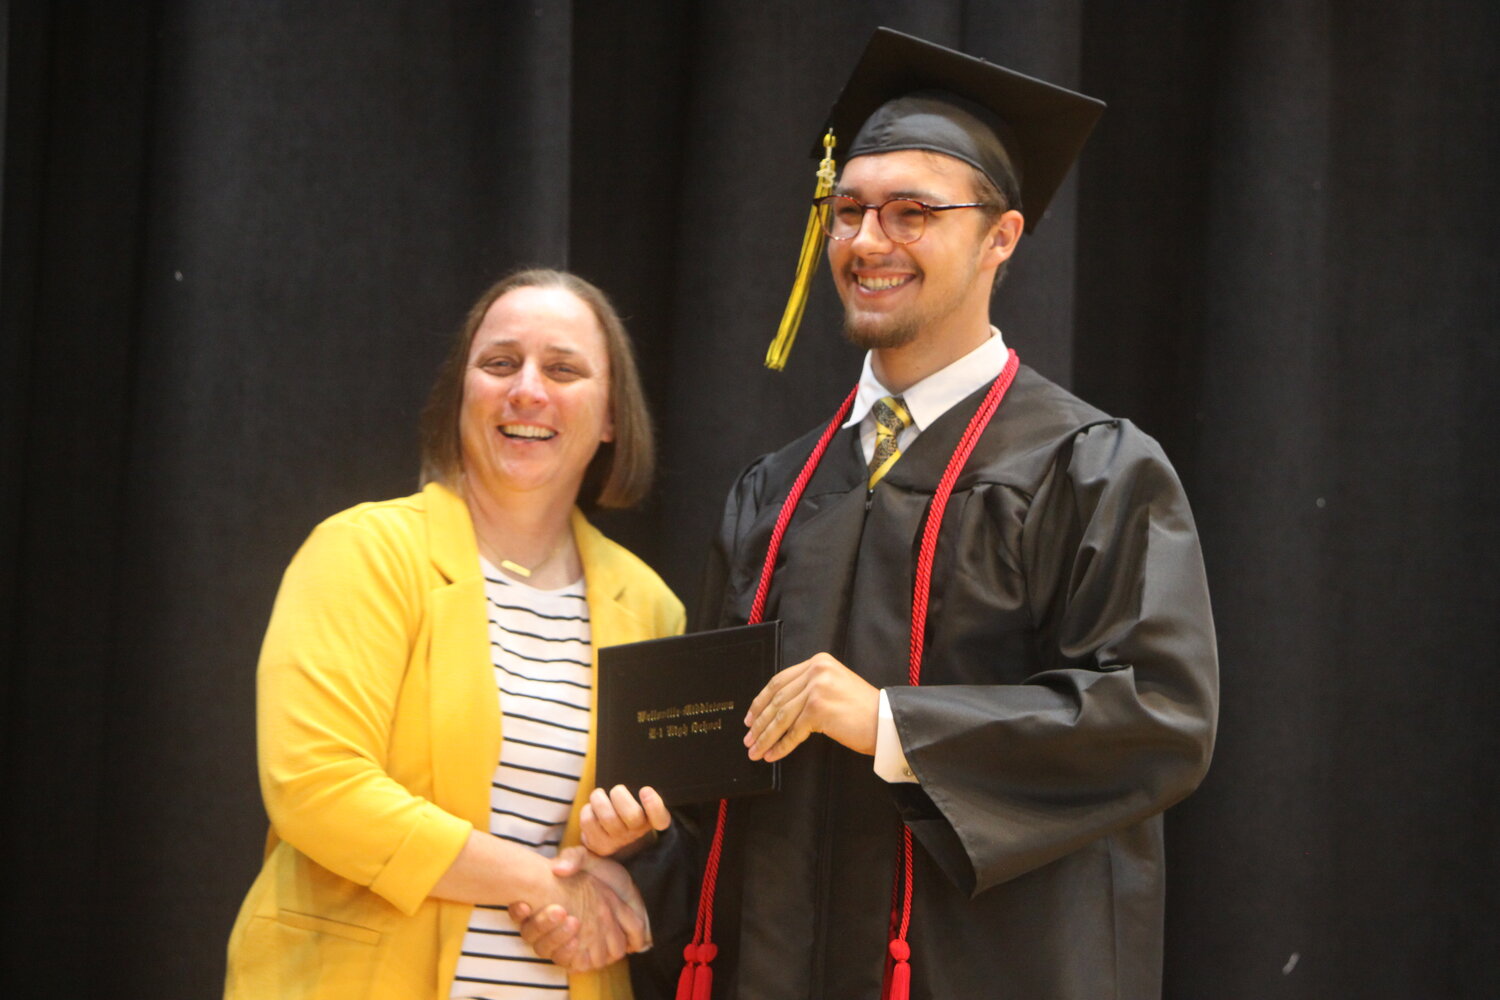 Gavin Hill, right, shakes hands with Wellsville-Middletown High School principal Jessie Cobb after receiving his diploma at the graduation ceremony on May 12. Below, Kaleb Peak speaks to the audience during the ceremony.